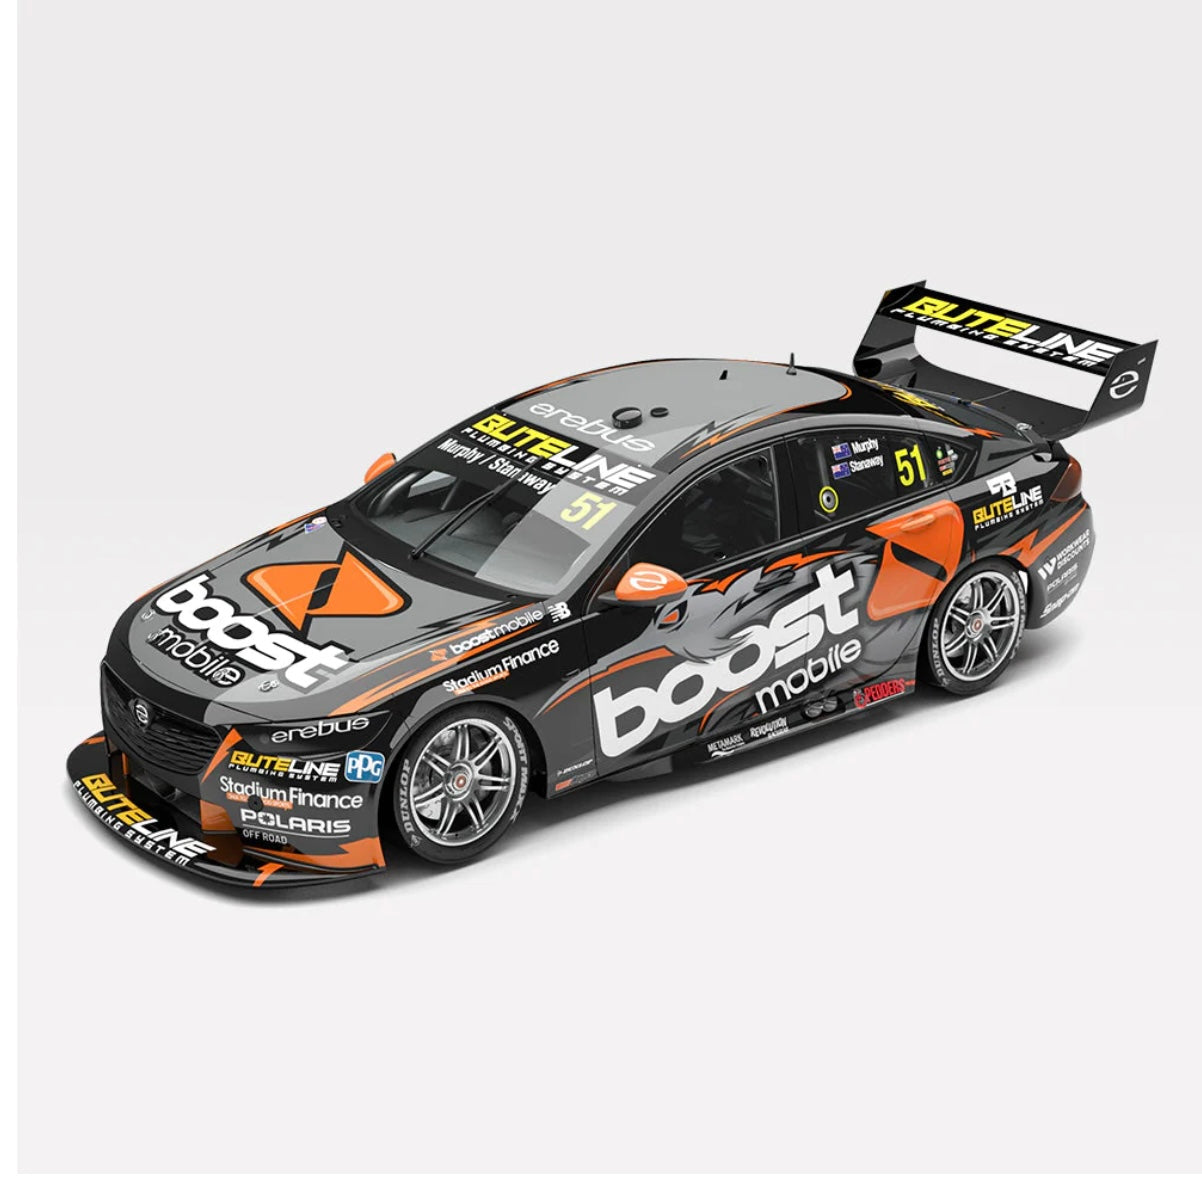 1:43 Stanaway/ Murphy #51 2021 Bathurst Wildcard Holden ZB Commodore Boost Mobile Racing Authentic Collectables